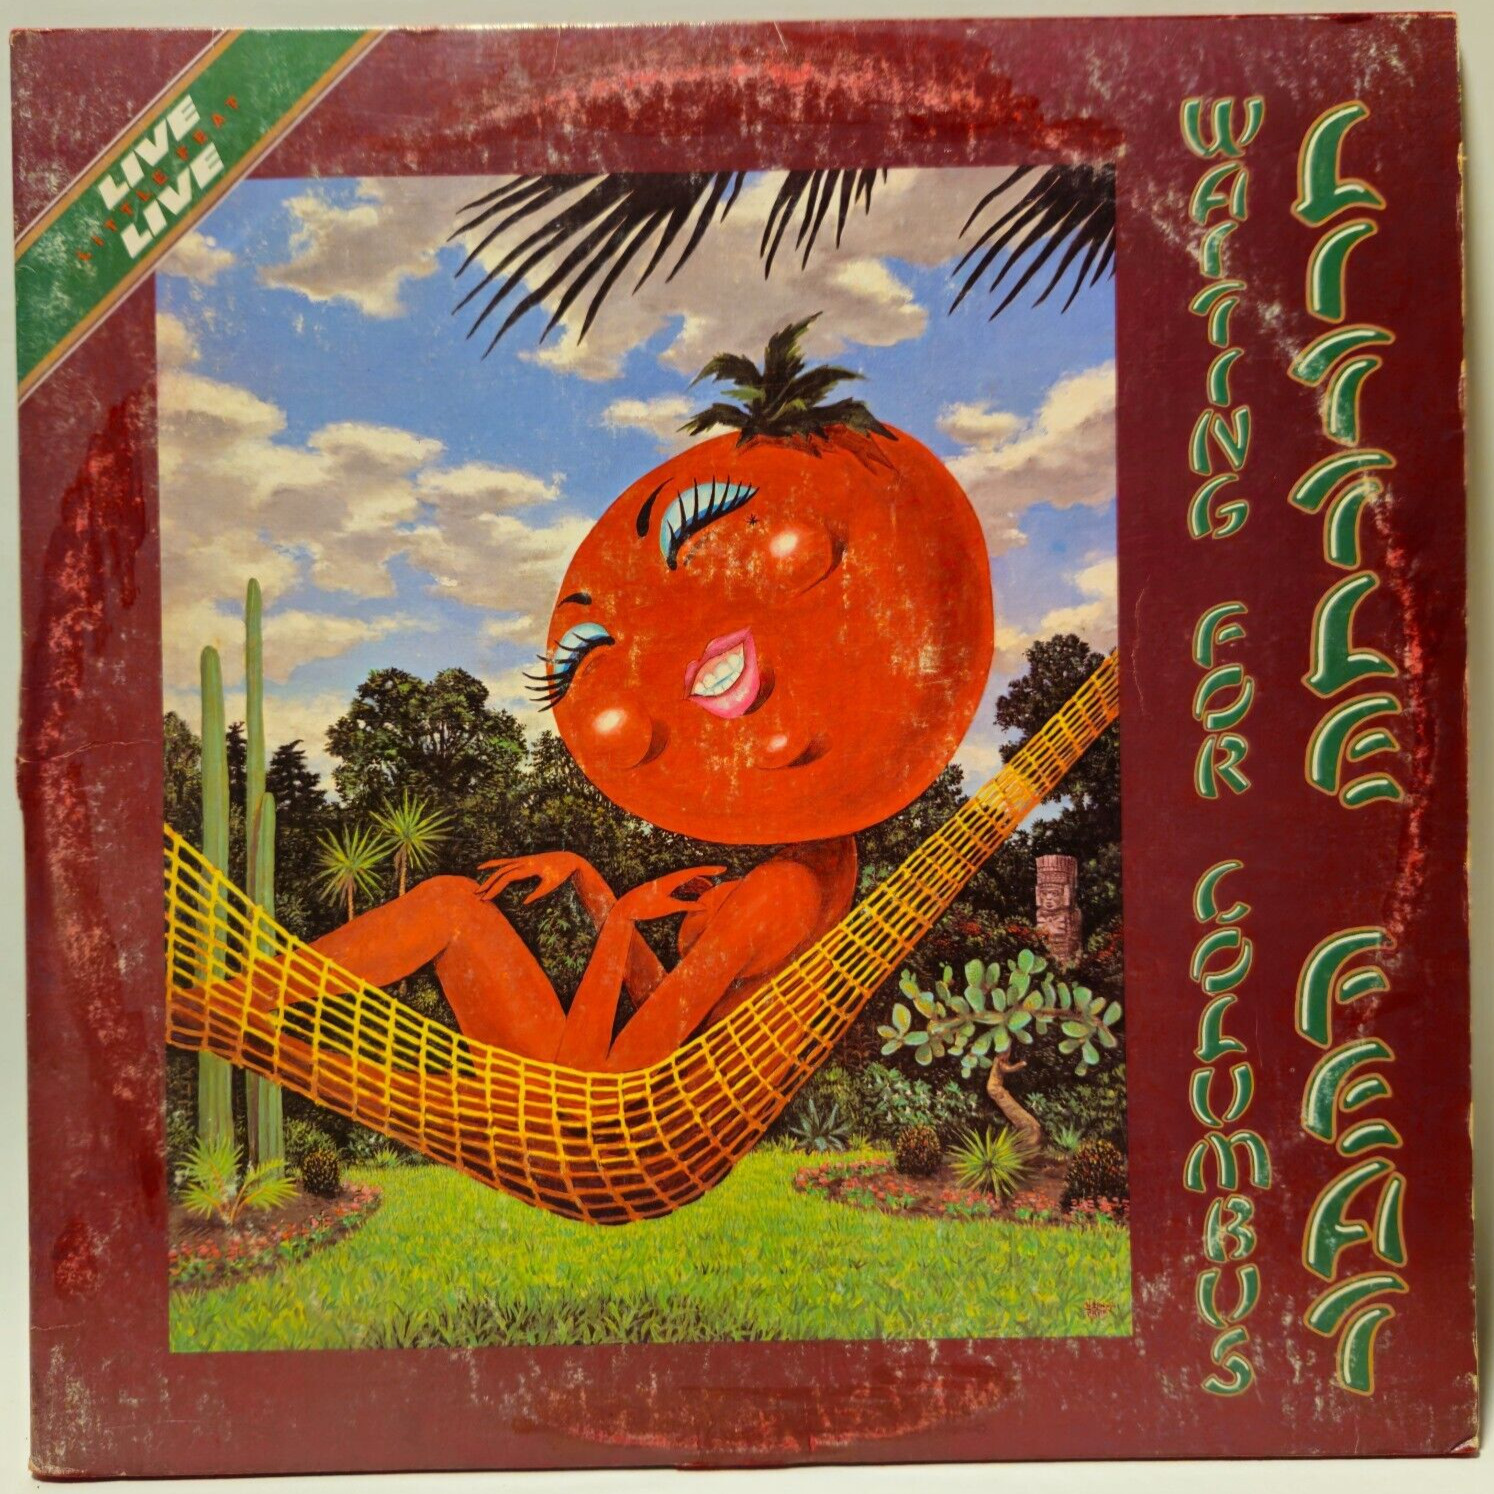 Little Feat - Waiting For Columbus - VG+ - Vintage LP - Ultrasonic Cleaned